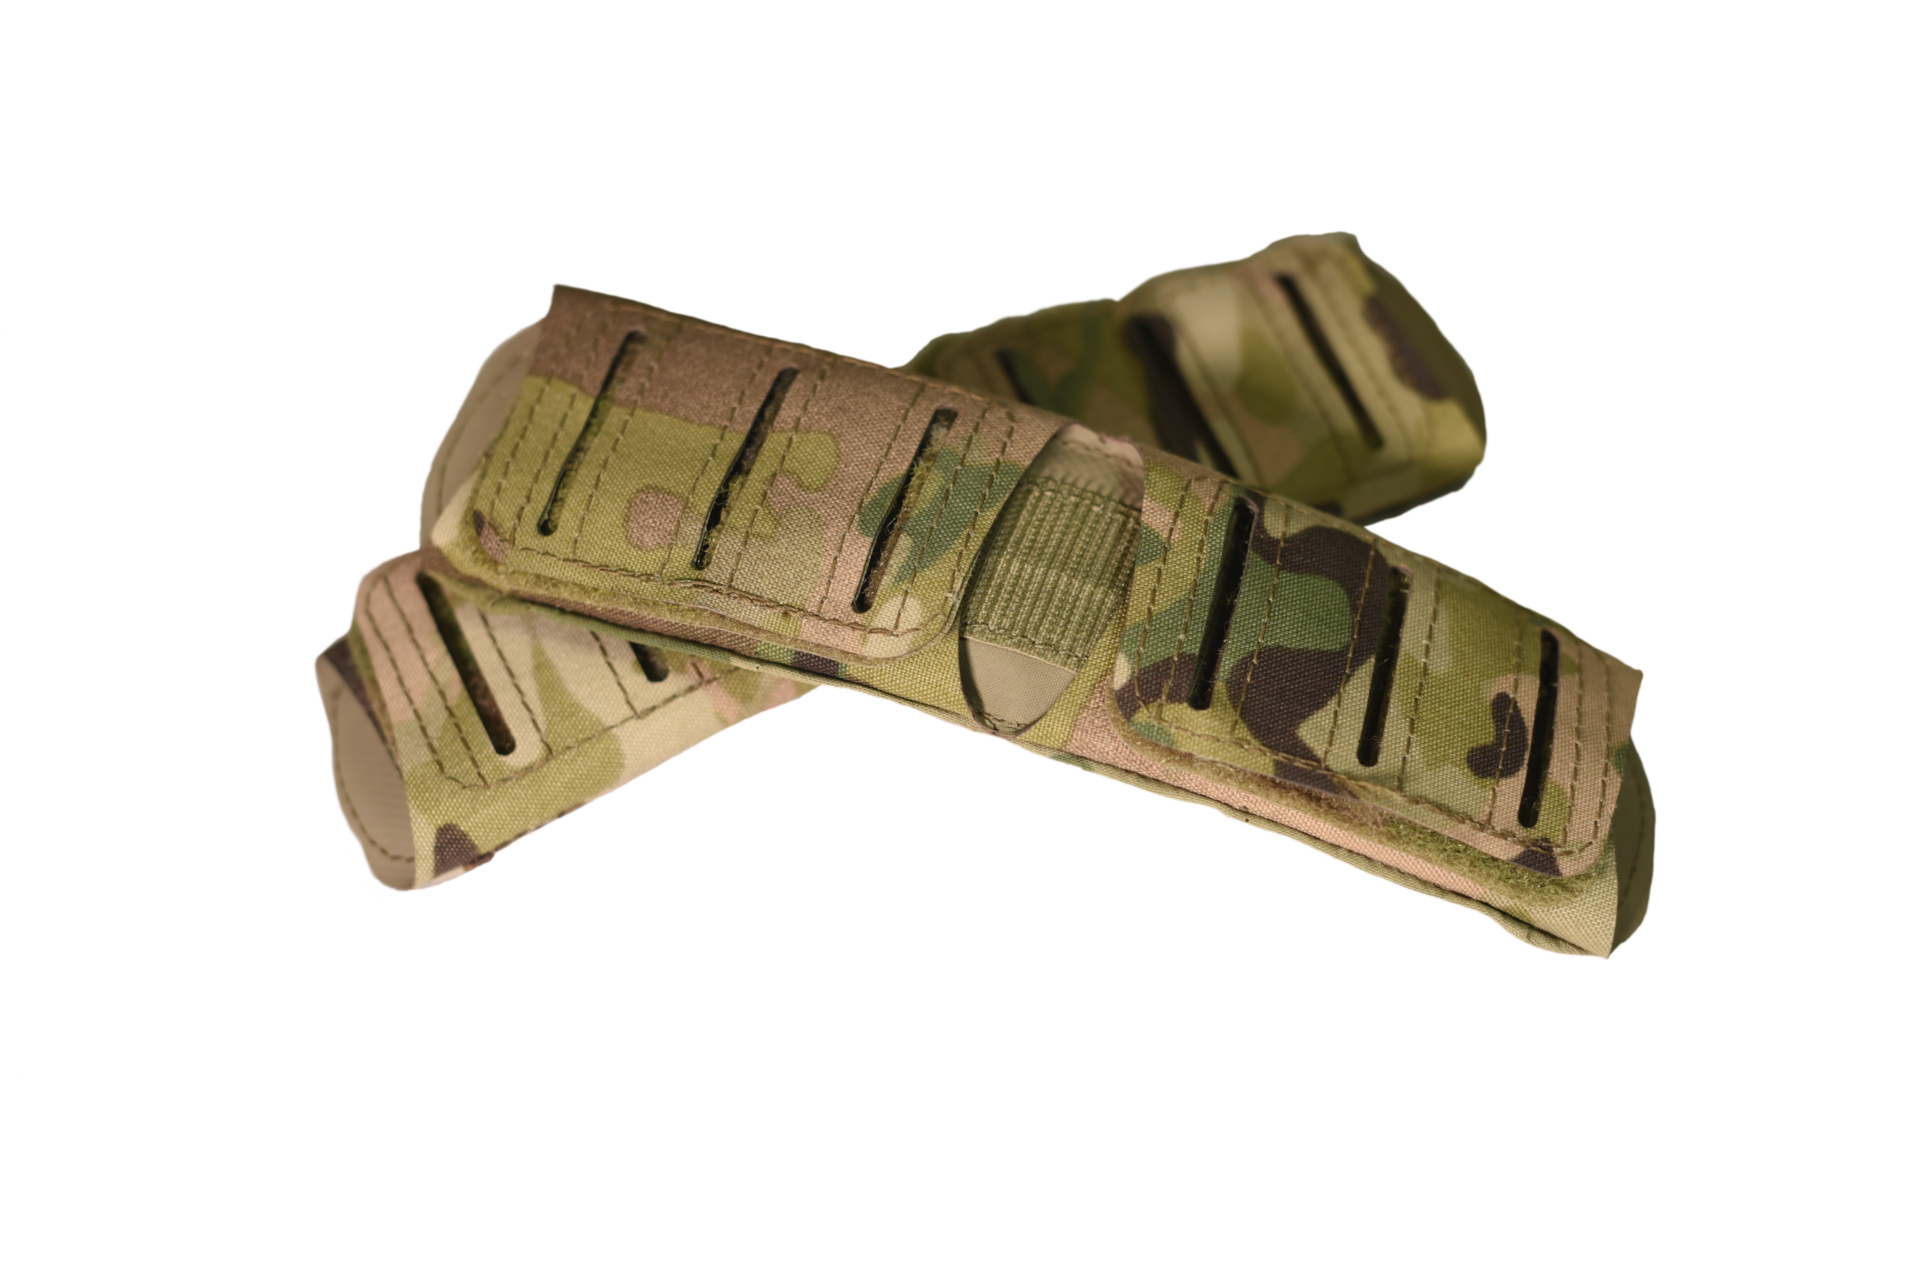 Chest Rig Pad Large